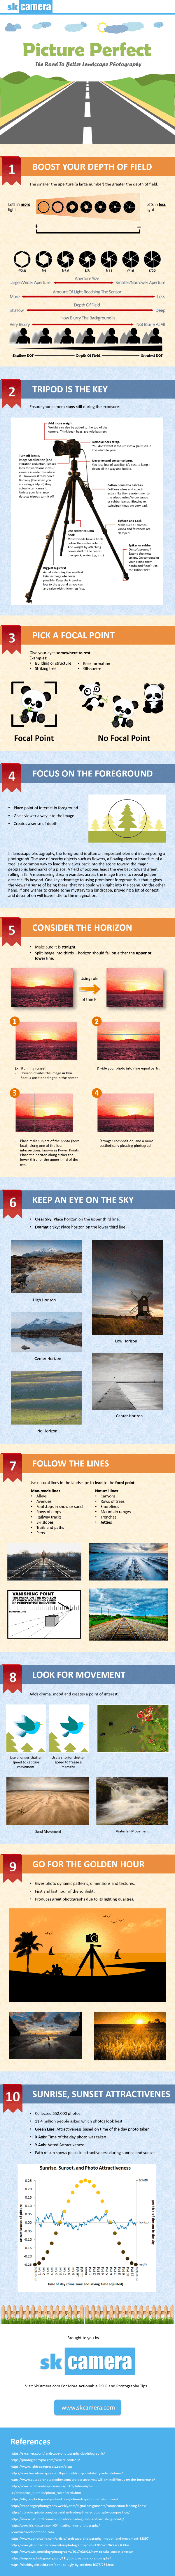 The Road to Better Landscape Photography